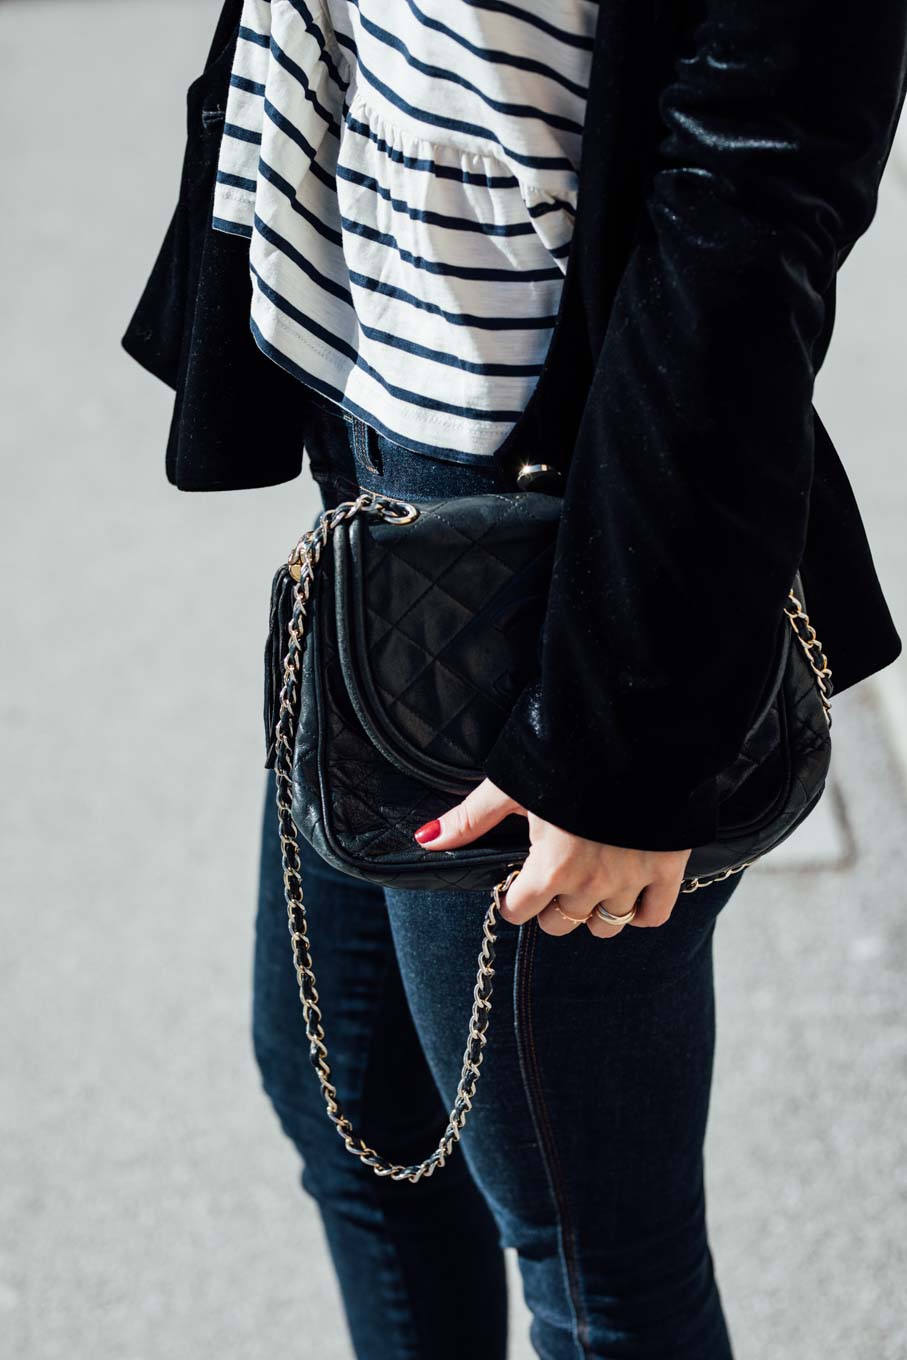 Outfit: How to be Parisian - Stripes, Chanel, Chloé | www.yourockmylife.com